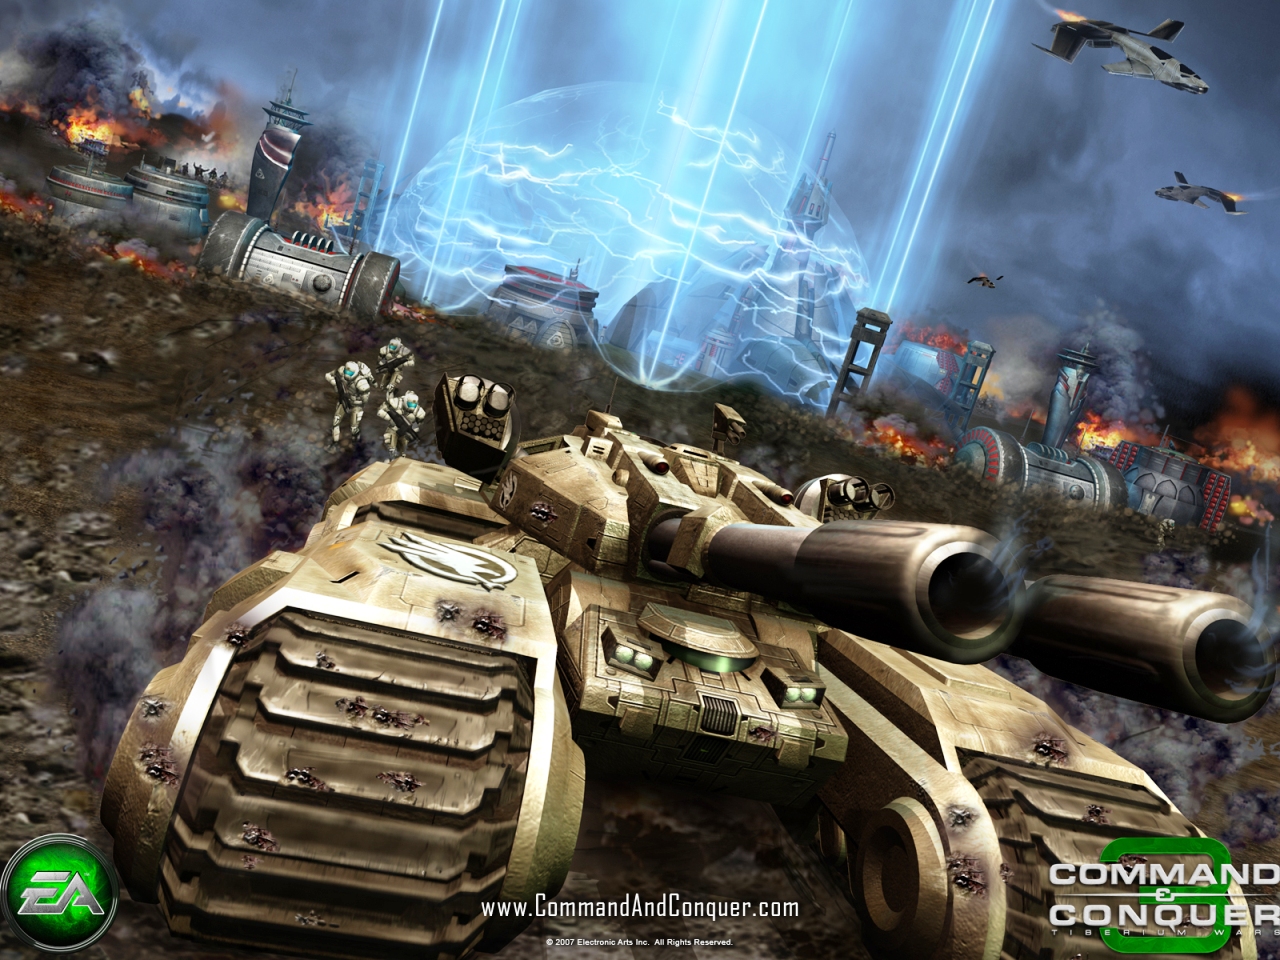 command and conquer wallpaper,action adventure game,pc game,strategy video game,combat vehicle,tank